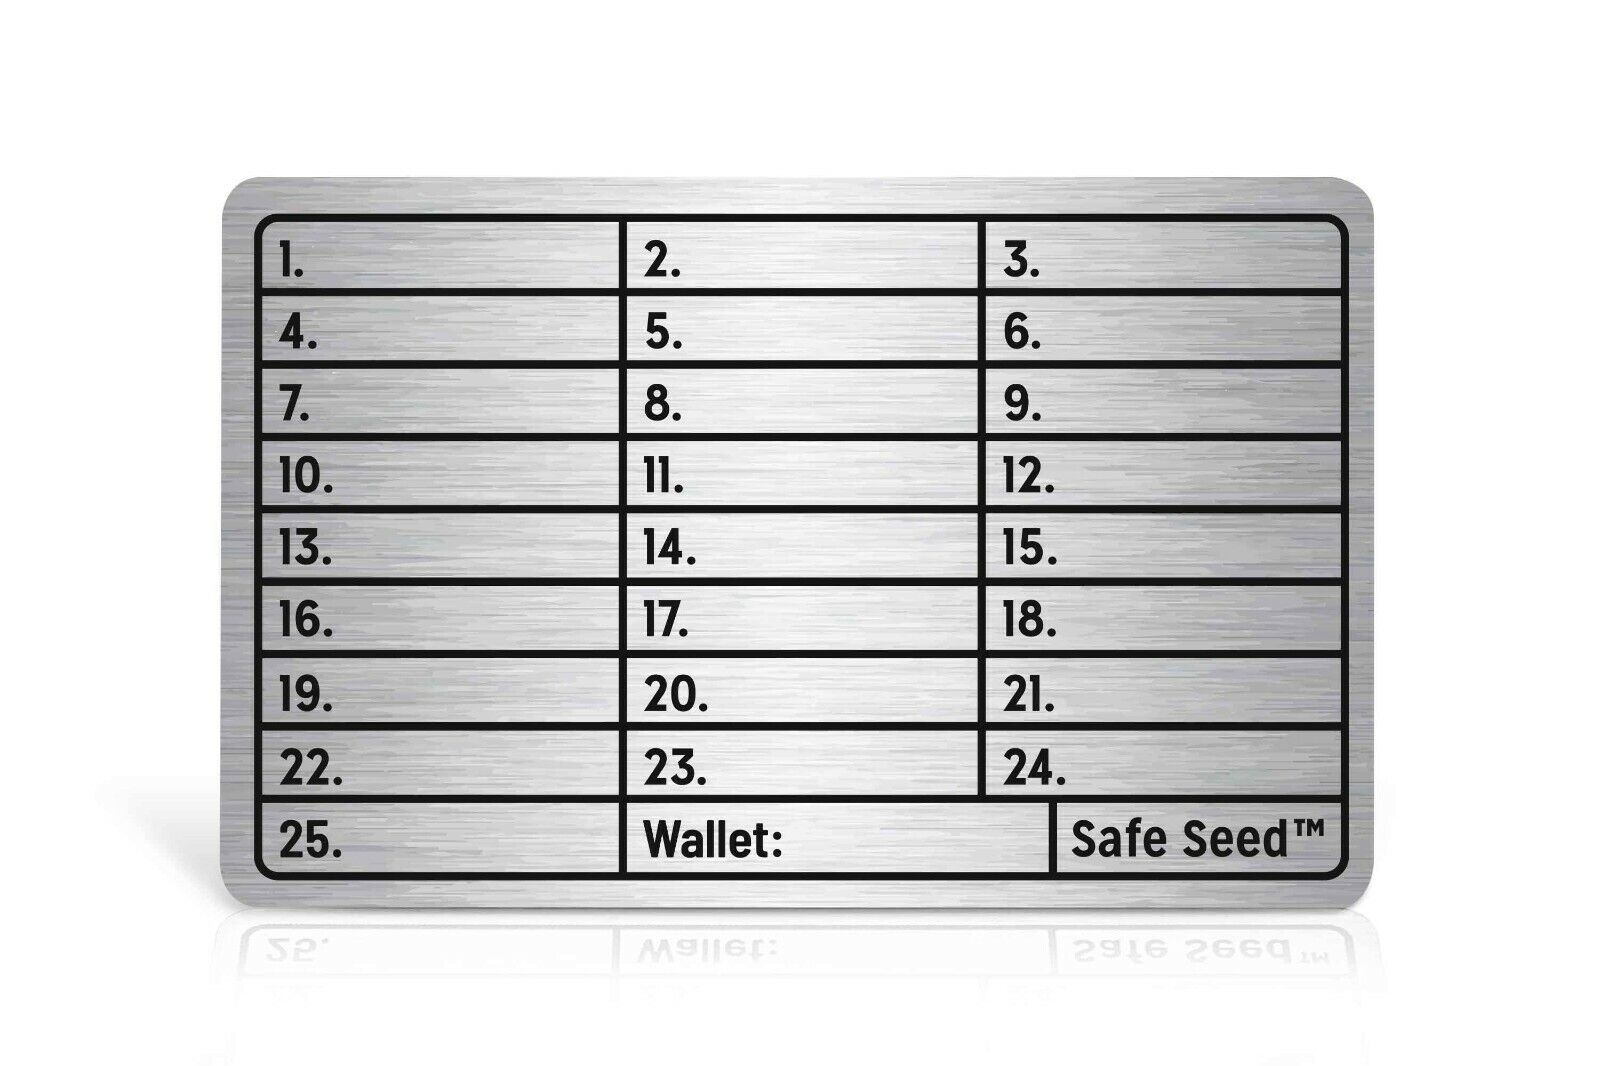 Safe Seed Stainless Steel Metal Wallet Stamp Plate Crypto Seed Phrase Storage